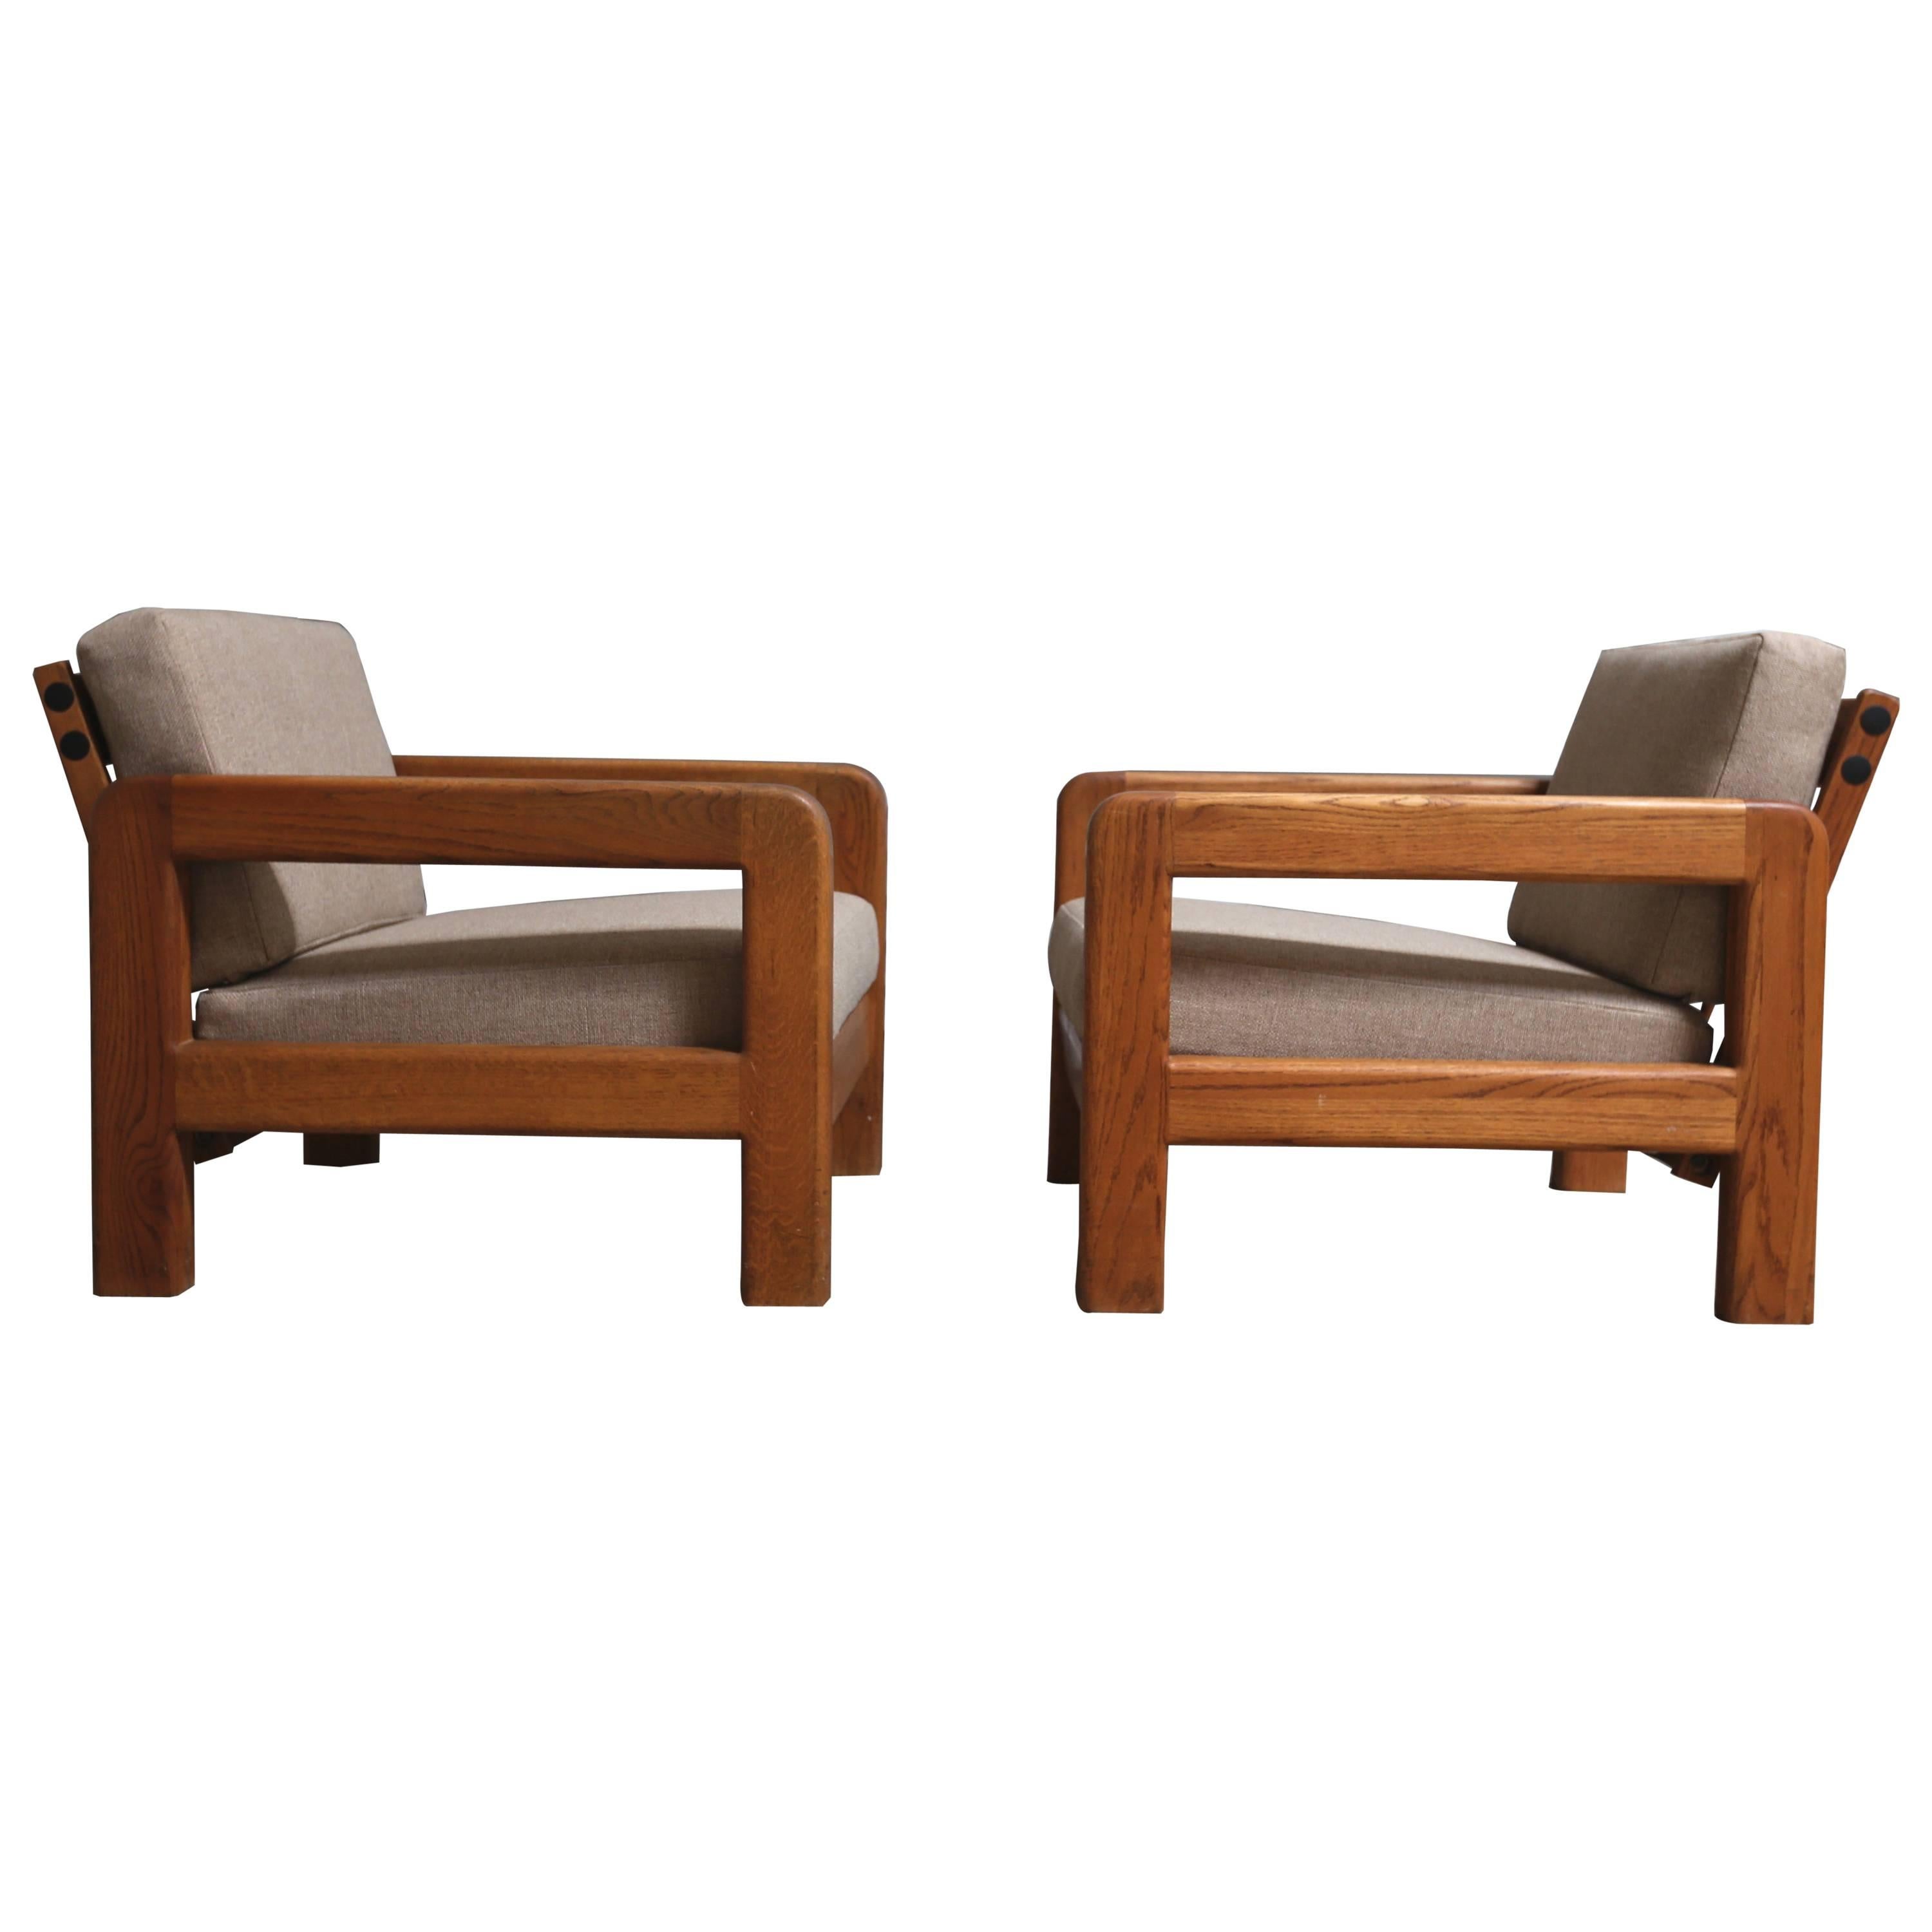 Pair of Modernist Oak Lounge Chairs